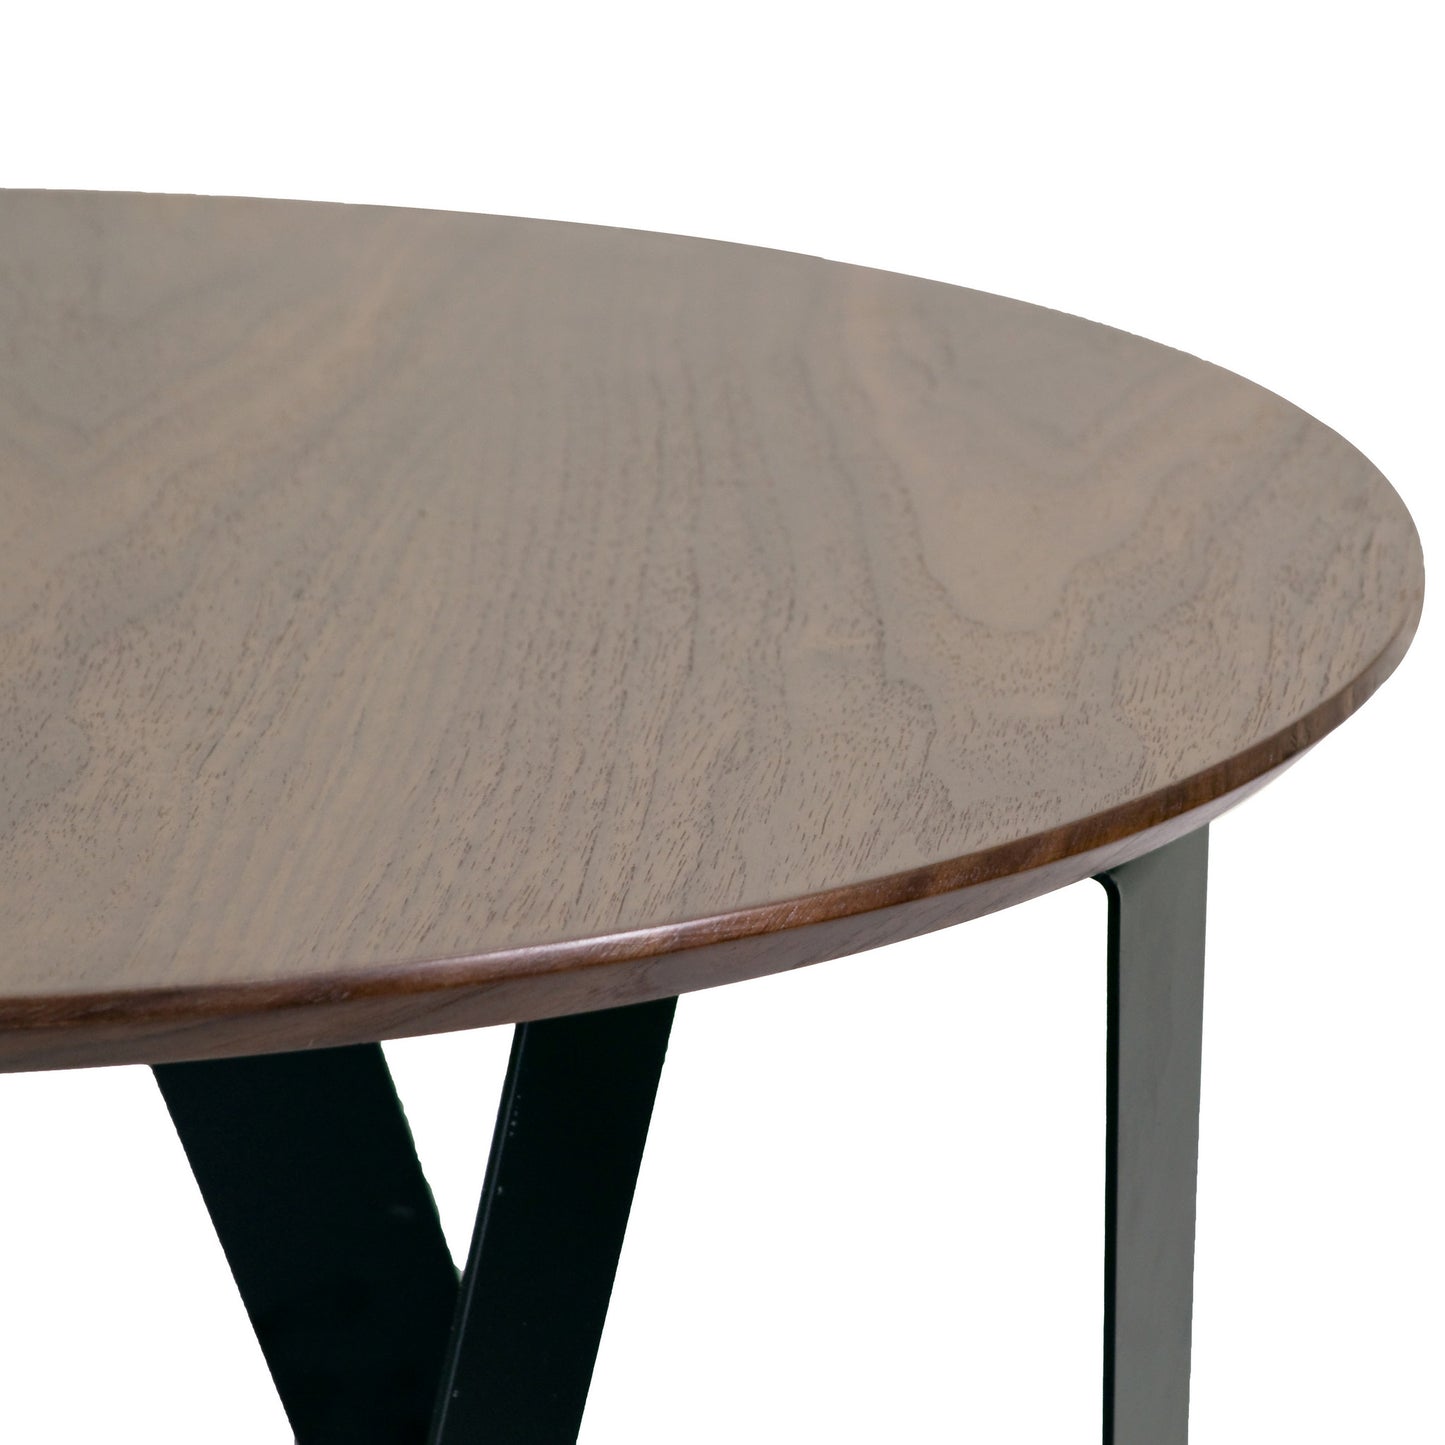 Aimi Walnut Color Round Modern Side Table with Black Metal Legs